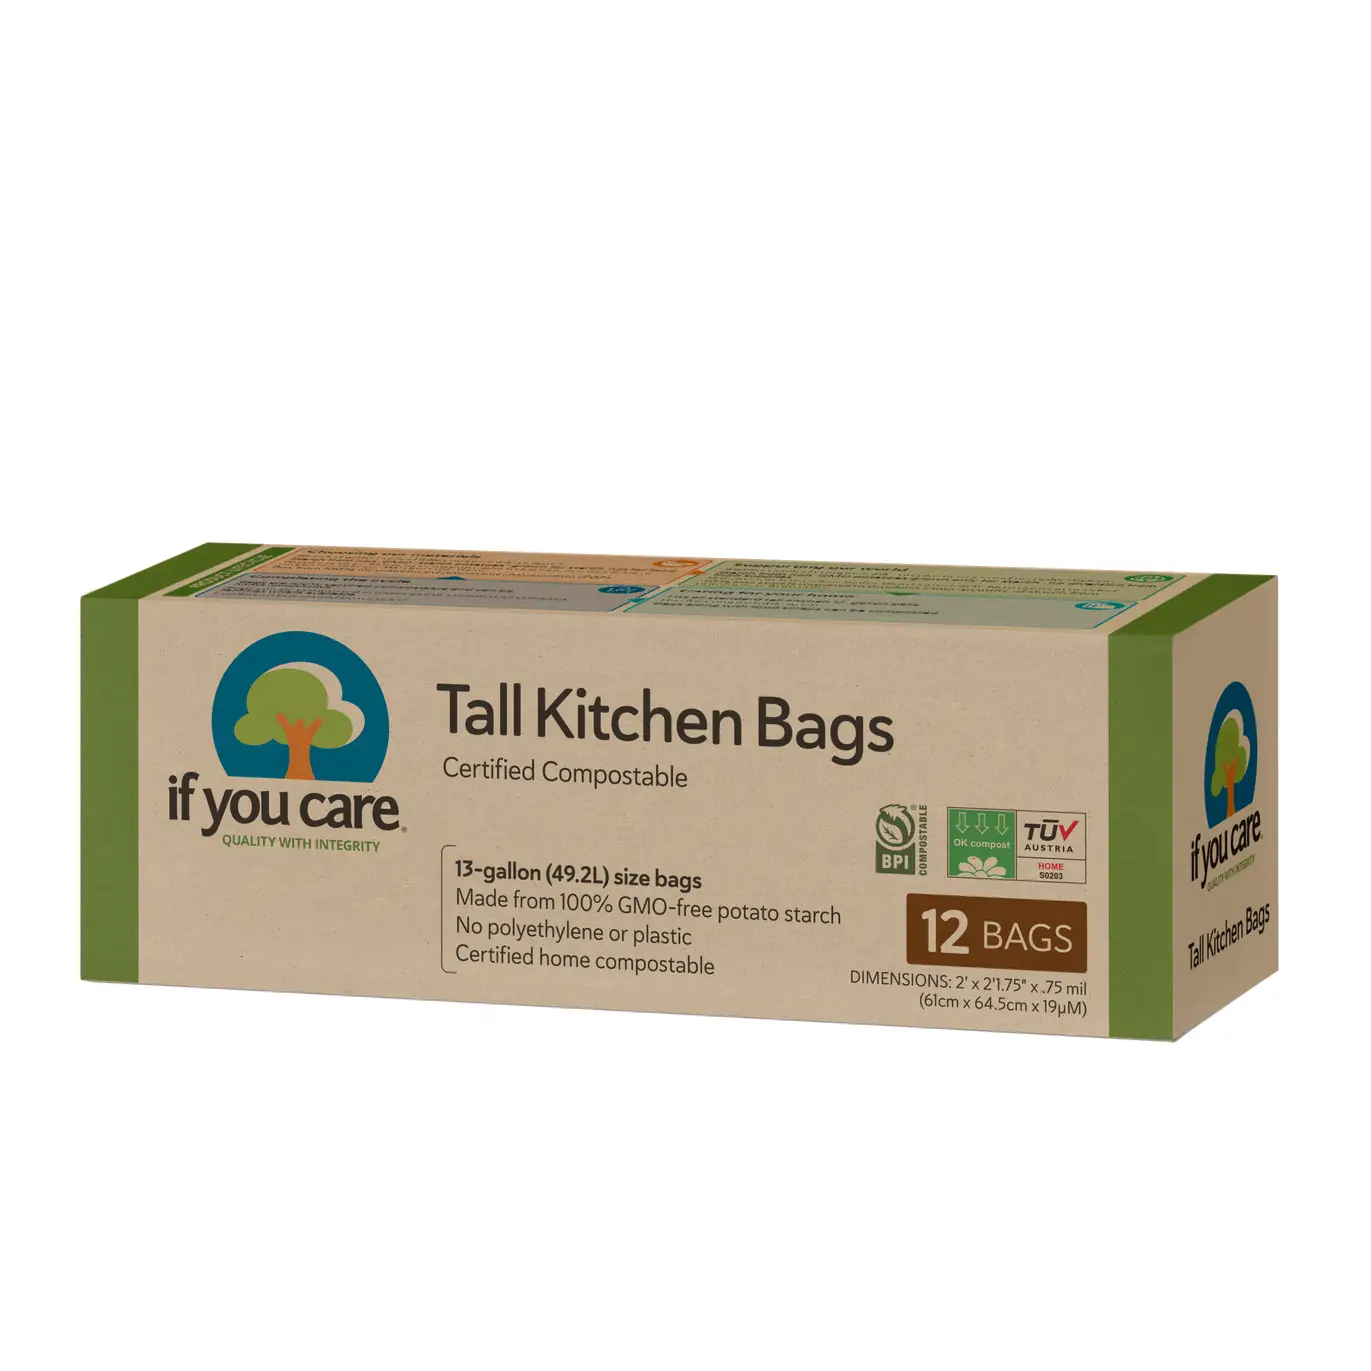 https://ecogirlshop.com/wp-content/uploads/2021/06/If-You-Care-Tall-Kitchen-Bags-Compostable-13-Gallon.webp